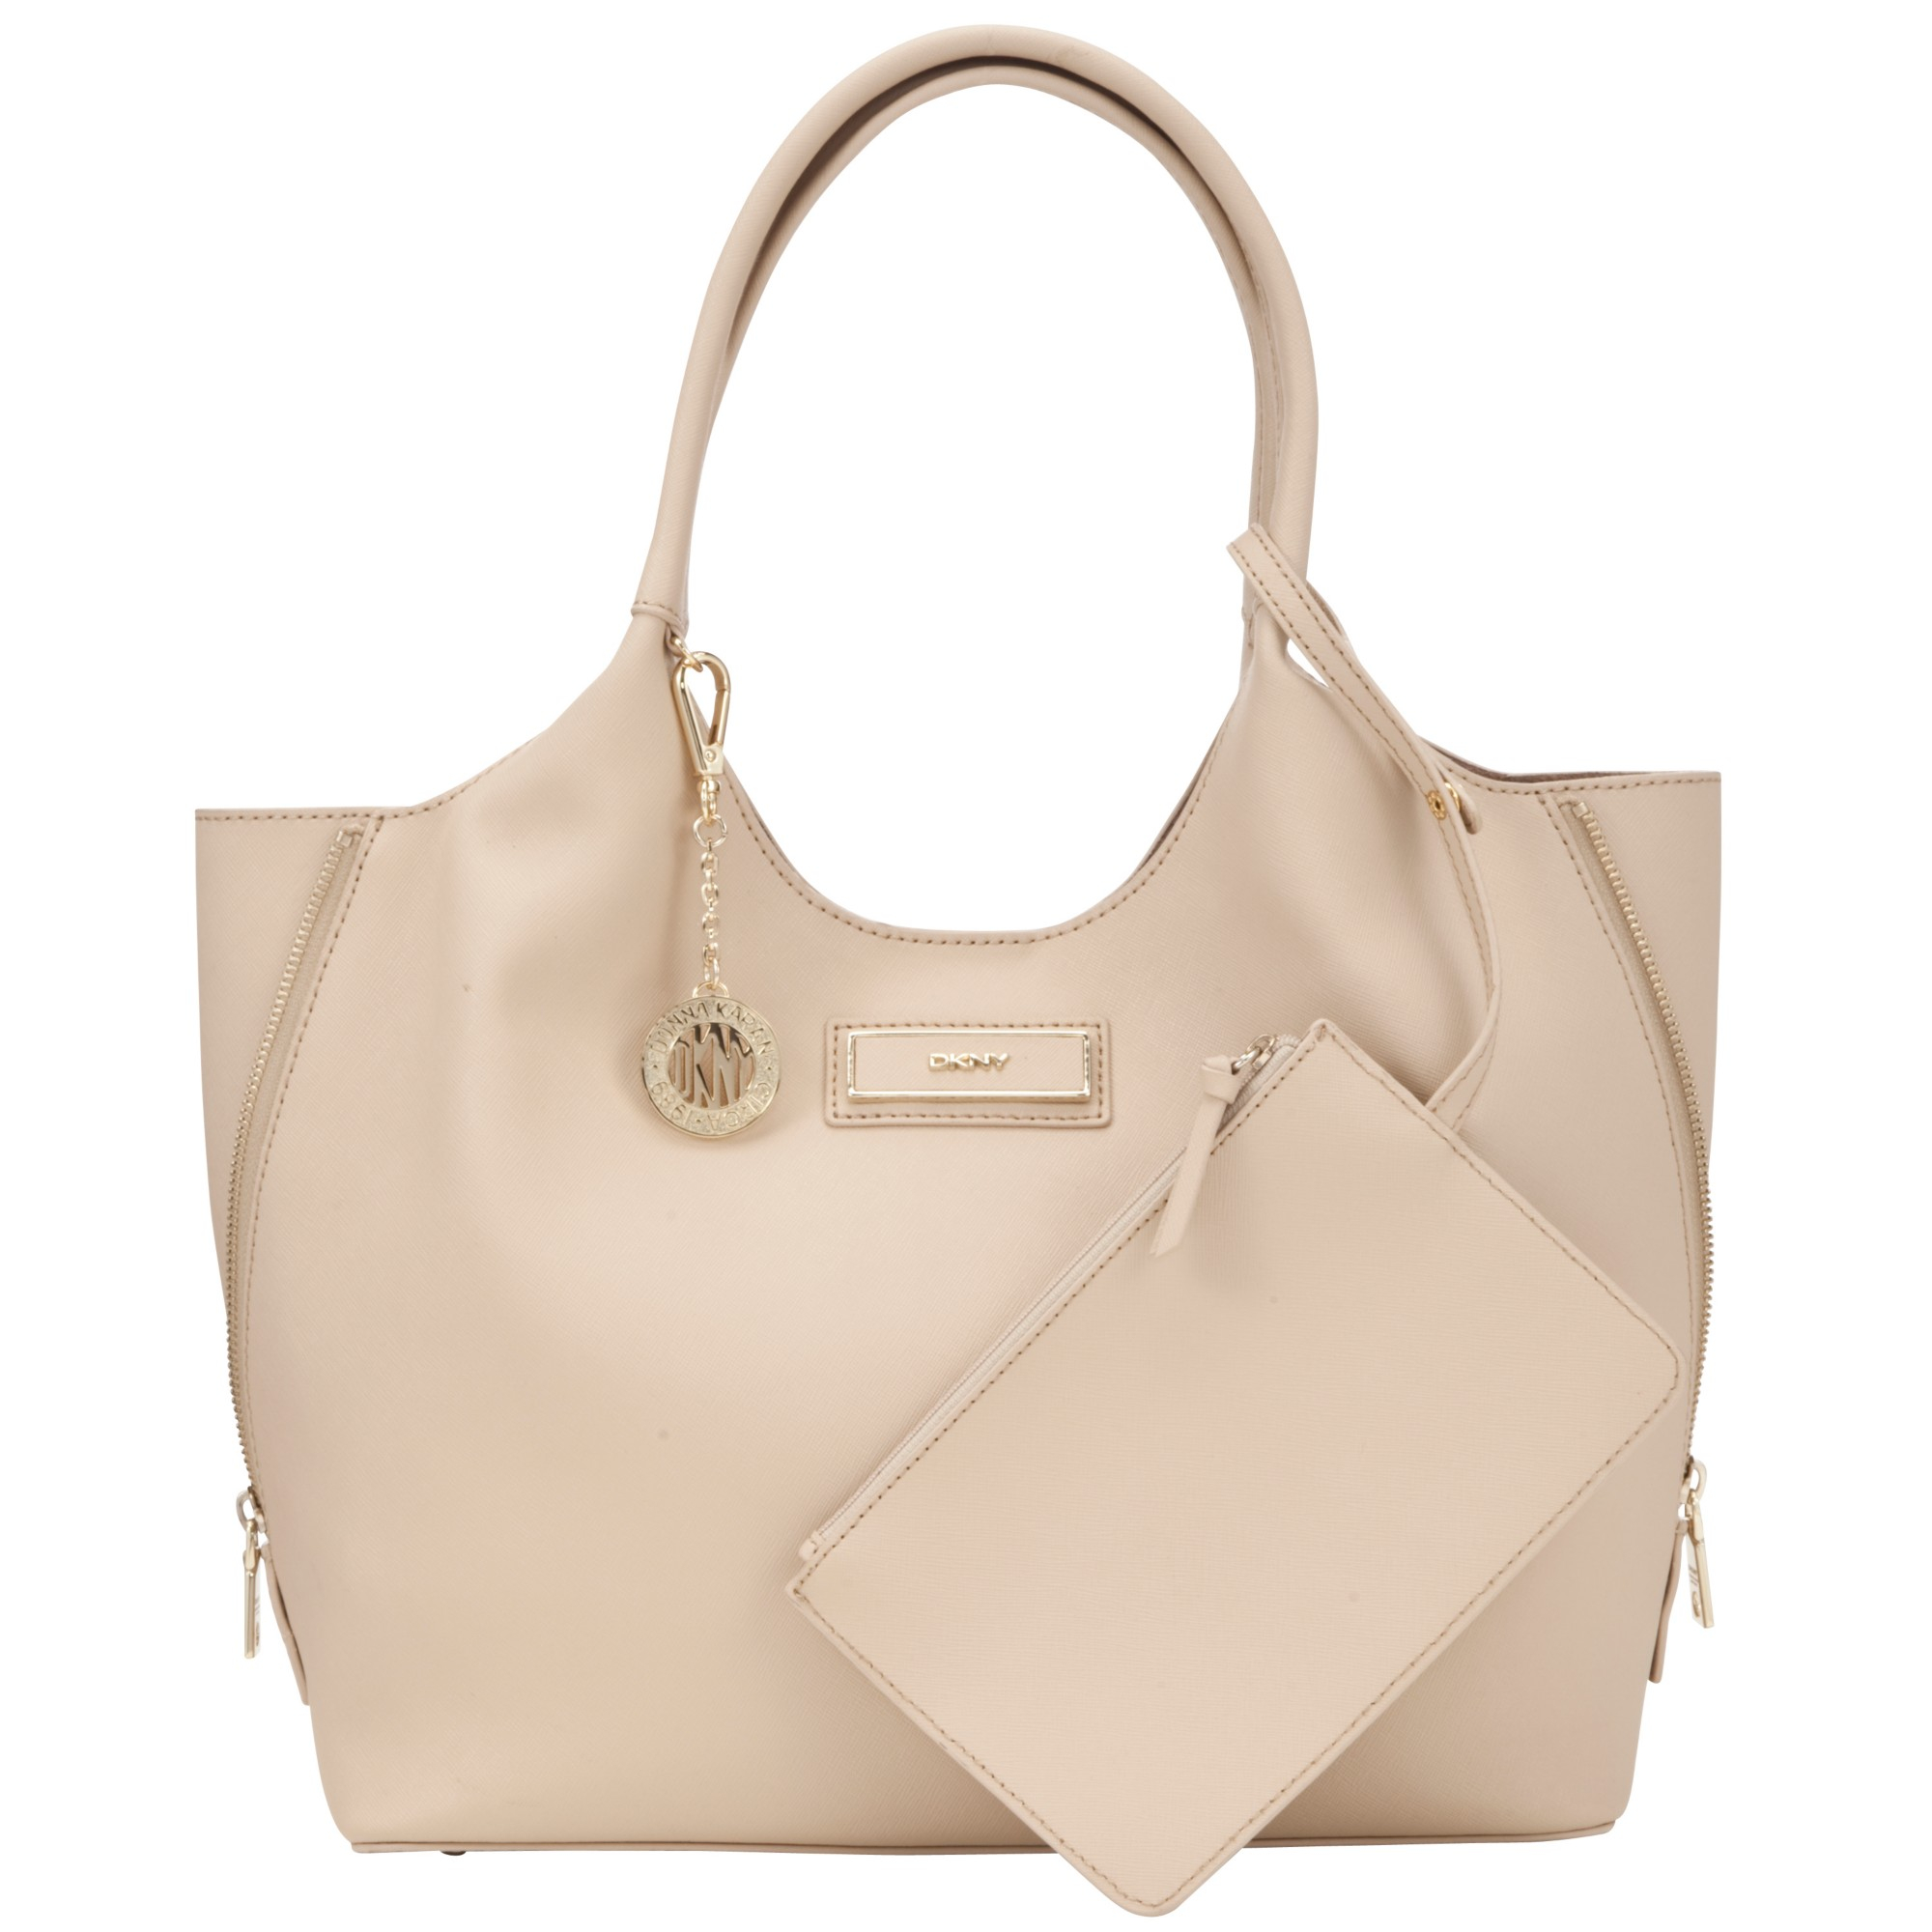 Dkny Saffiano Leather Tote Handbag in Beige (Sand) | Lyst